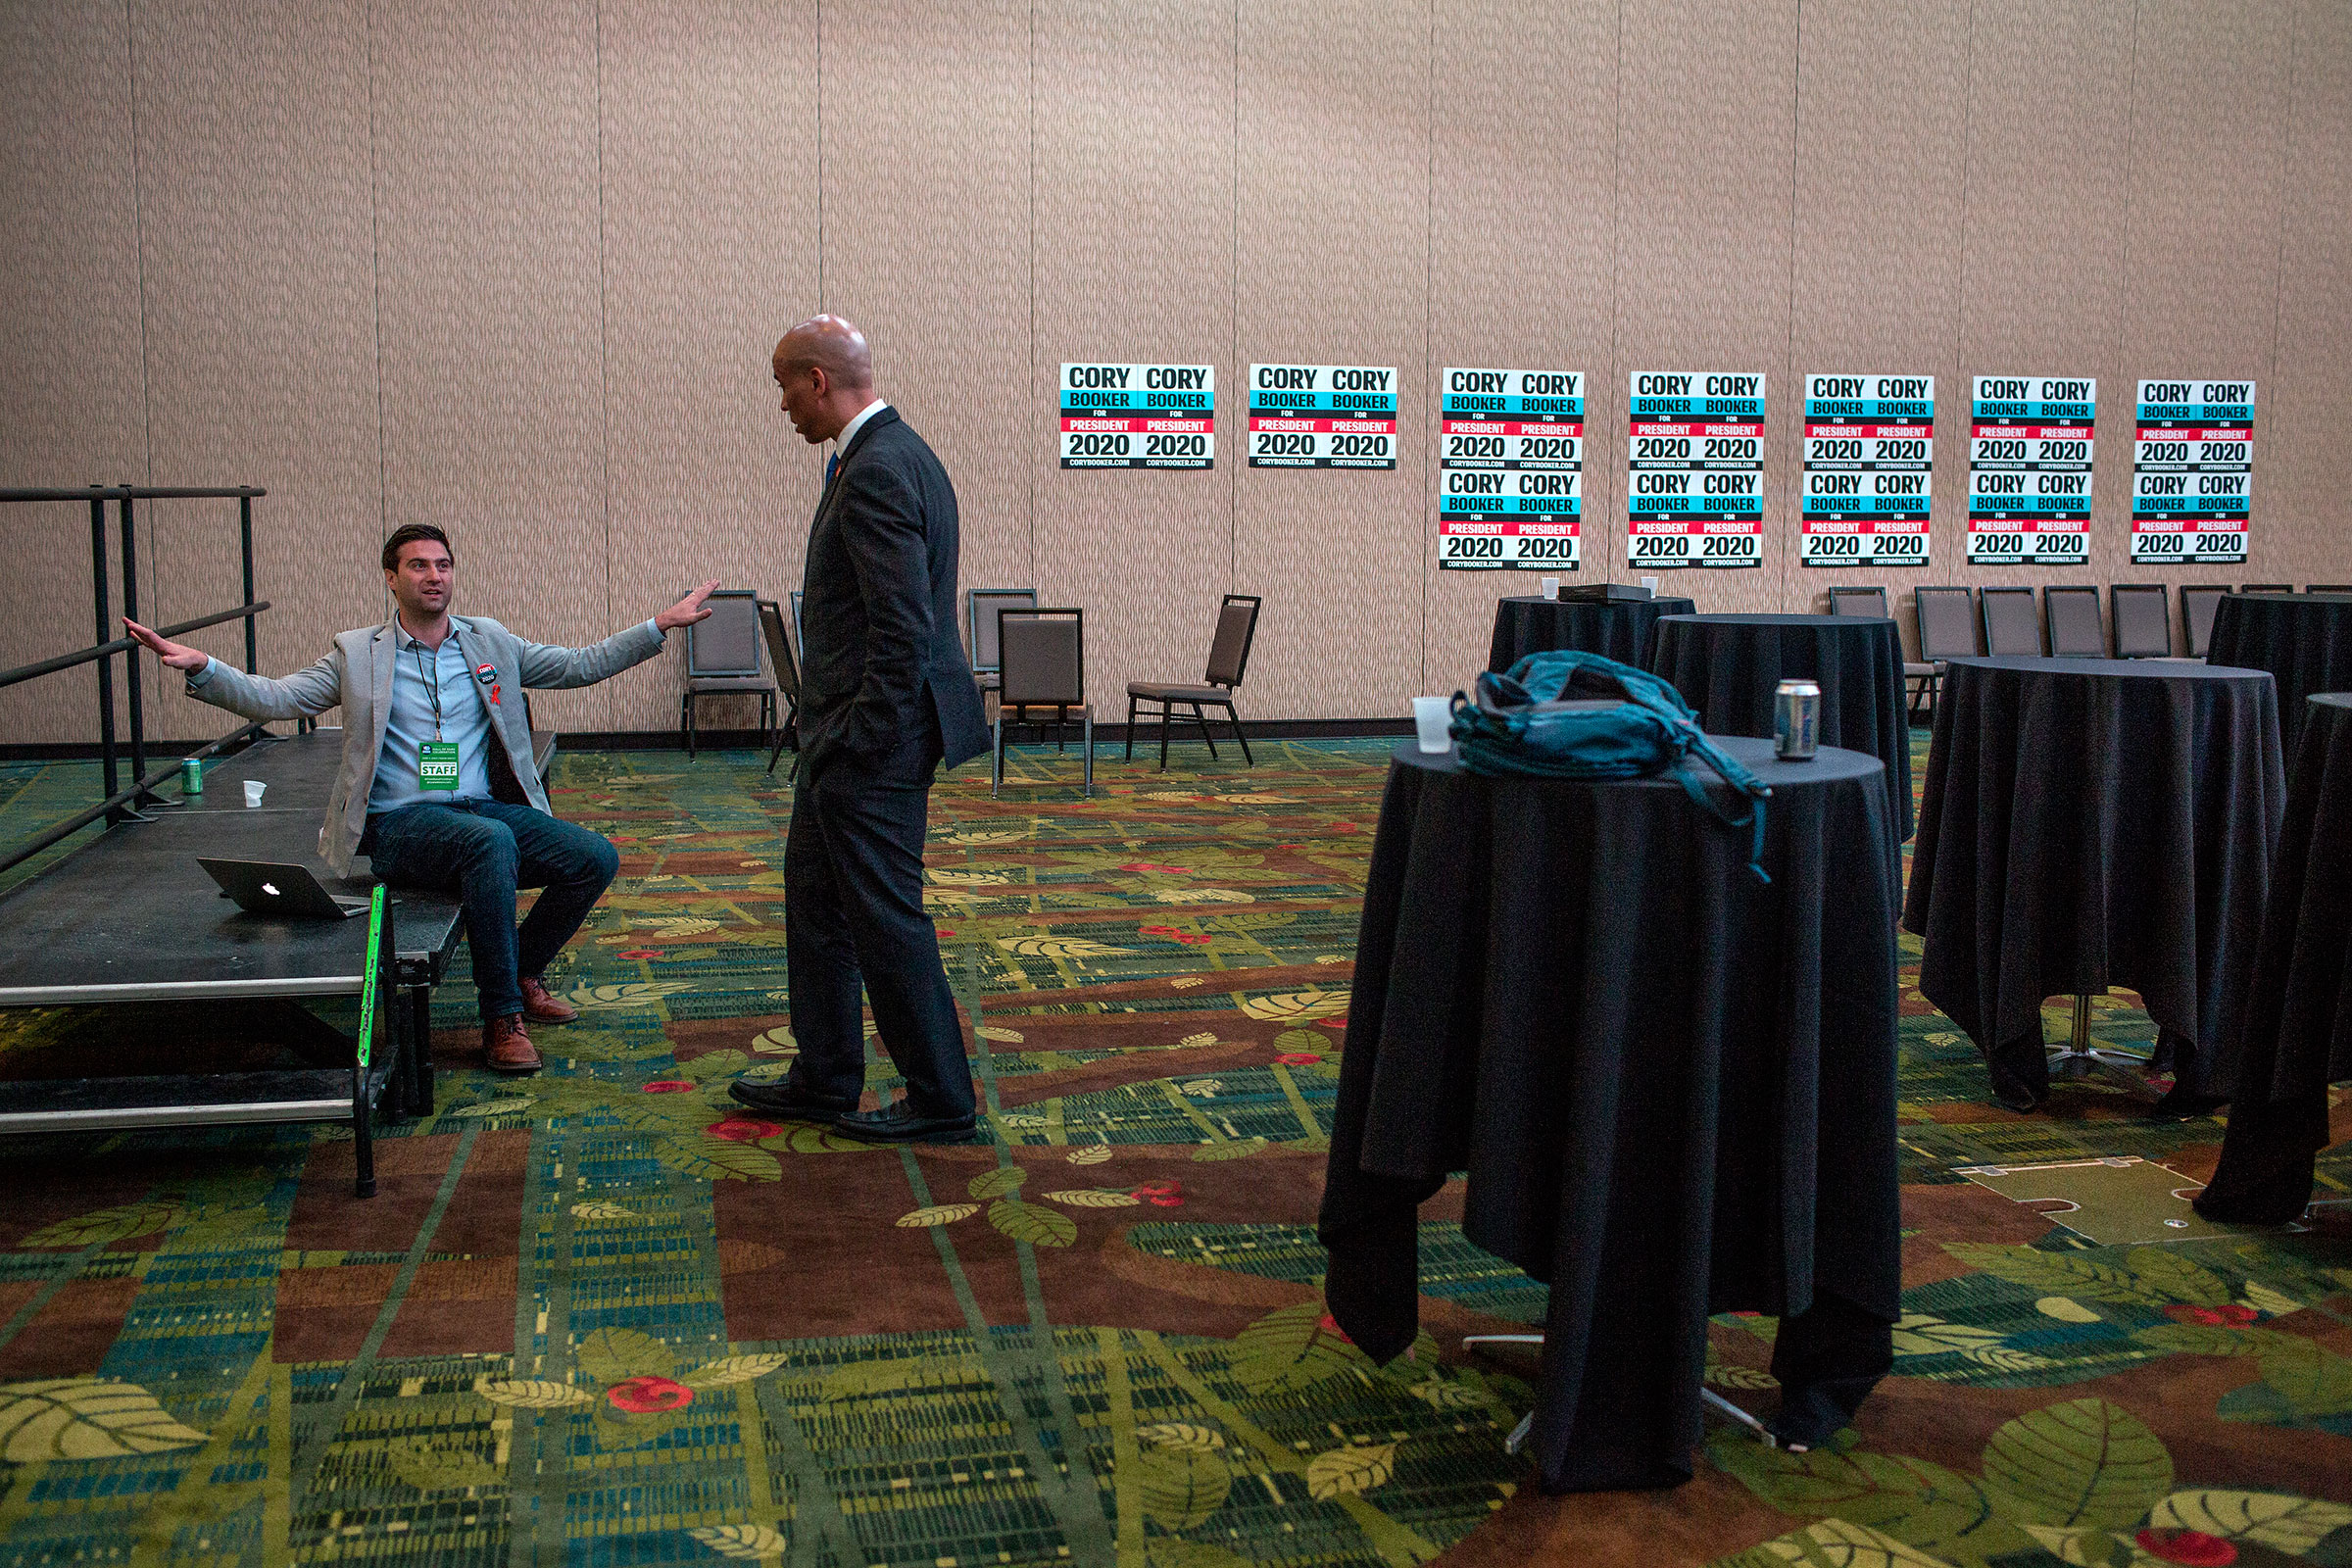 Booker speaks with Iowa State Director Mike Frosolone after a day of campaigning in the Grand Ballroom of the Cedar Rapids Double Tree Convention Complex following the Democratic Hall of Fame event on June, 9. (Danny Wilcox Frazier—VII for TIME)